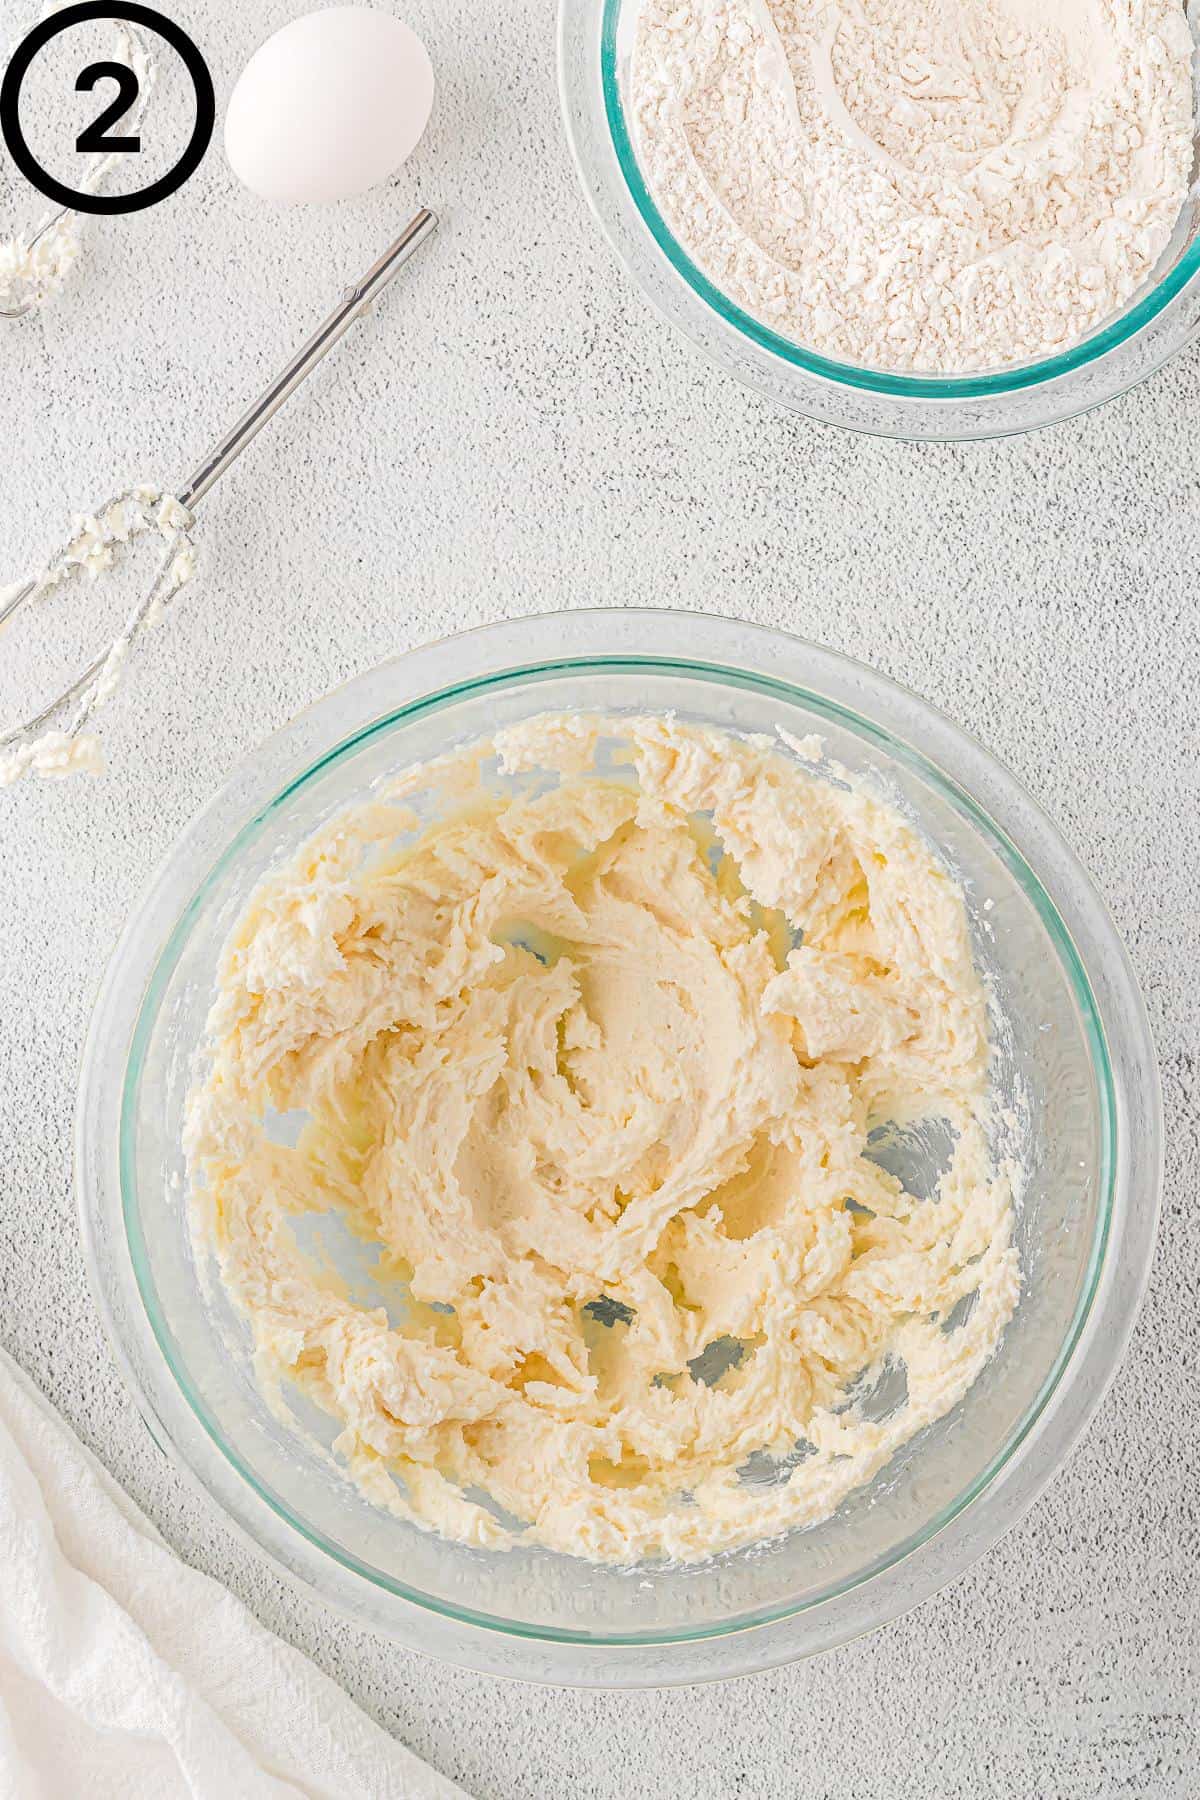 Non-dairy butter and sugar creamed together in a glass bowl.